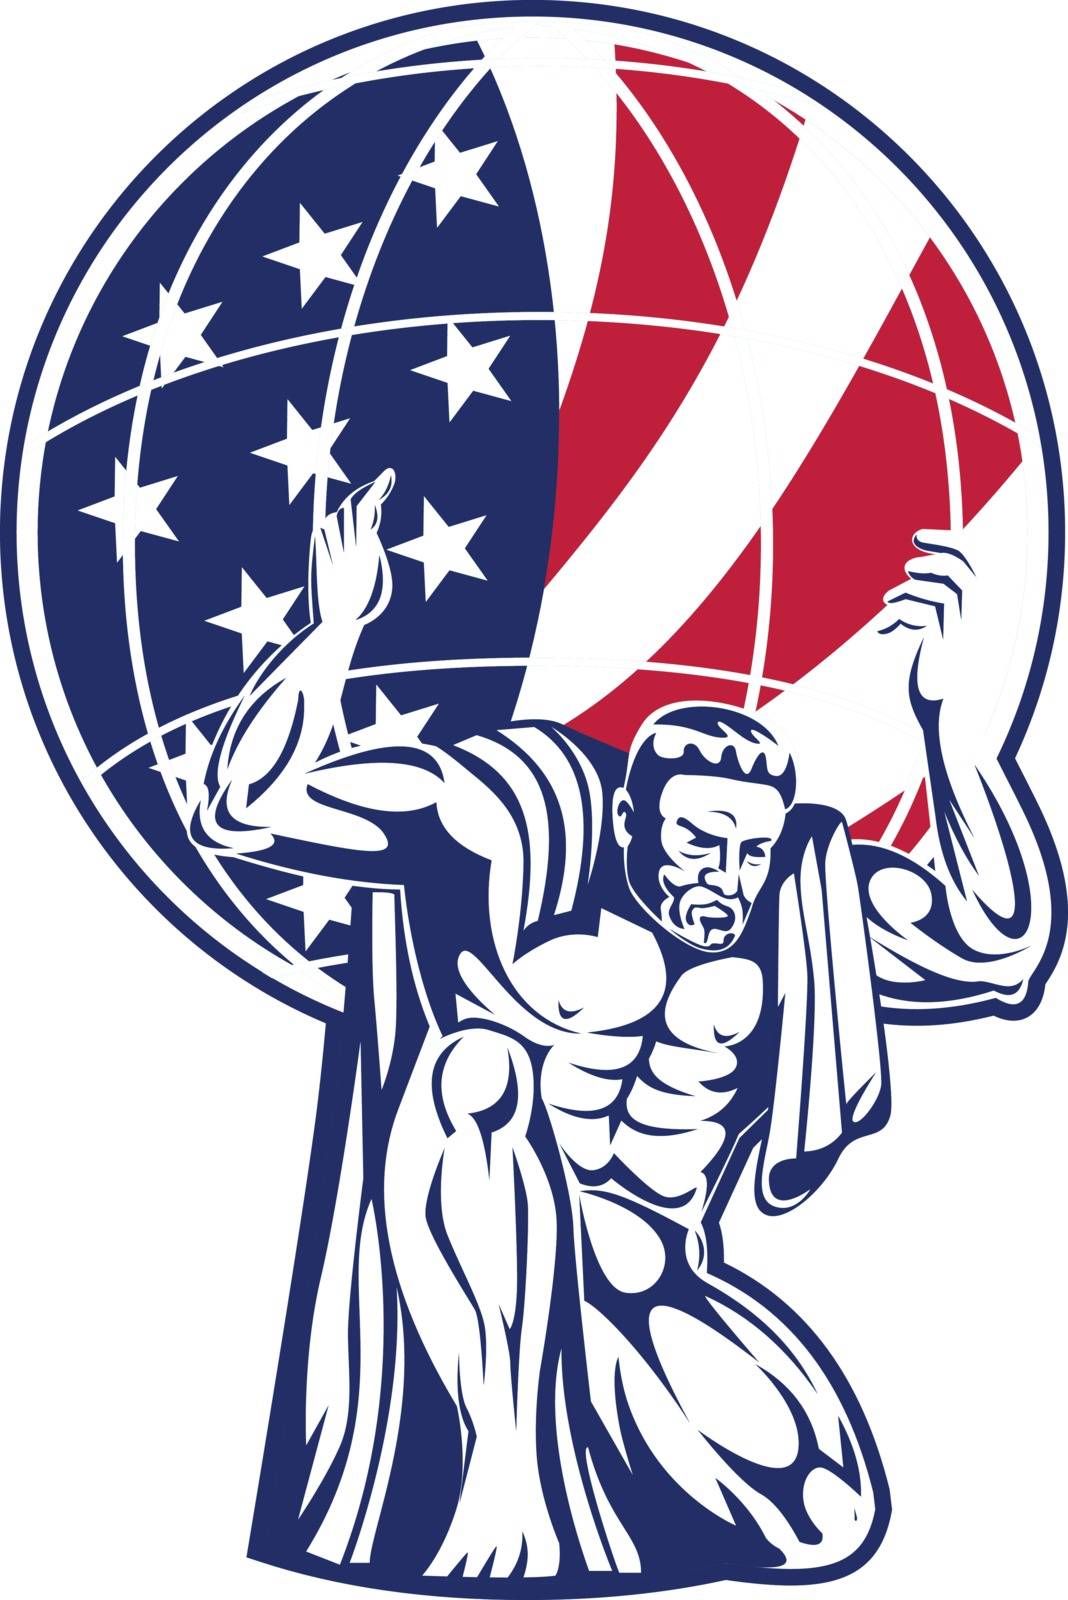 Icon retro style illustration of Atlas, a Titan carrying a globe with American United States of America USA star spangled banner or stars and stripes flag inside circle isolated background.